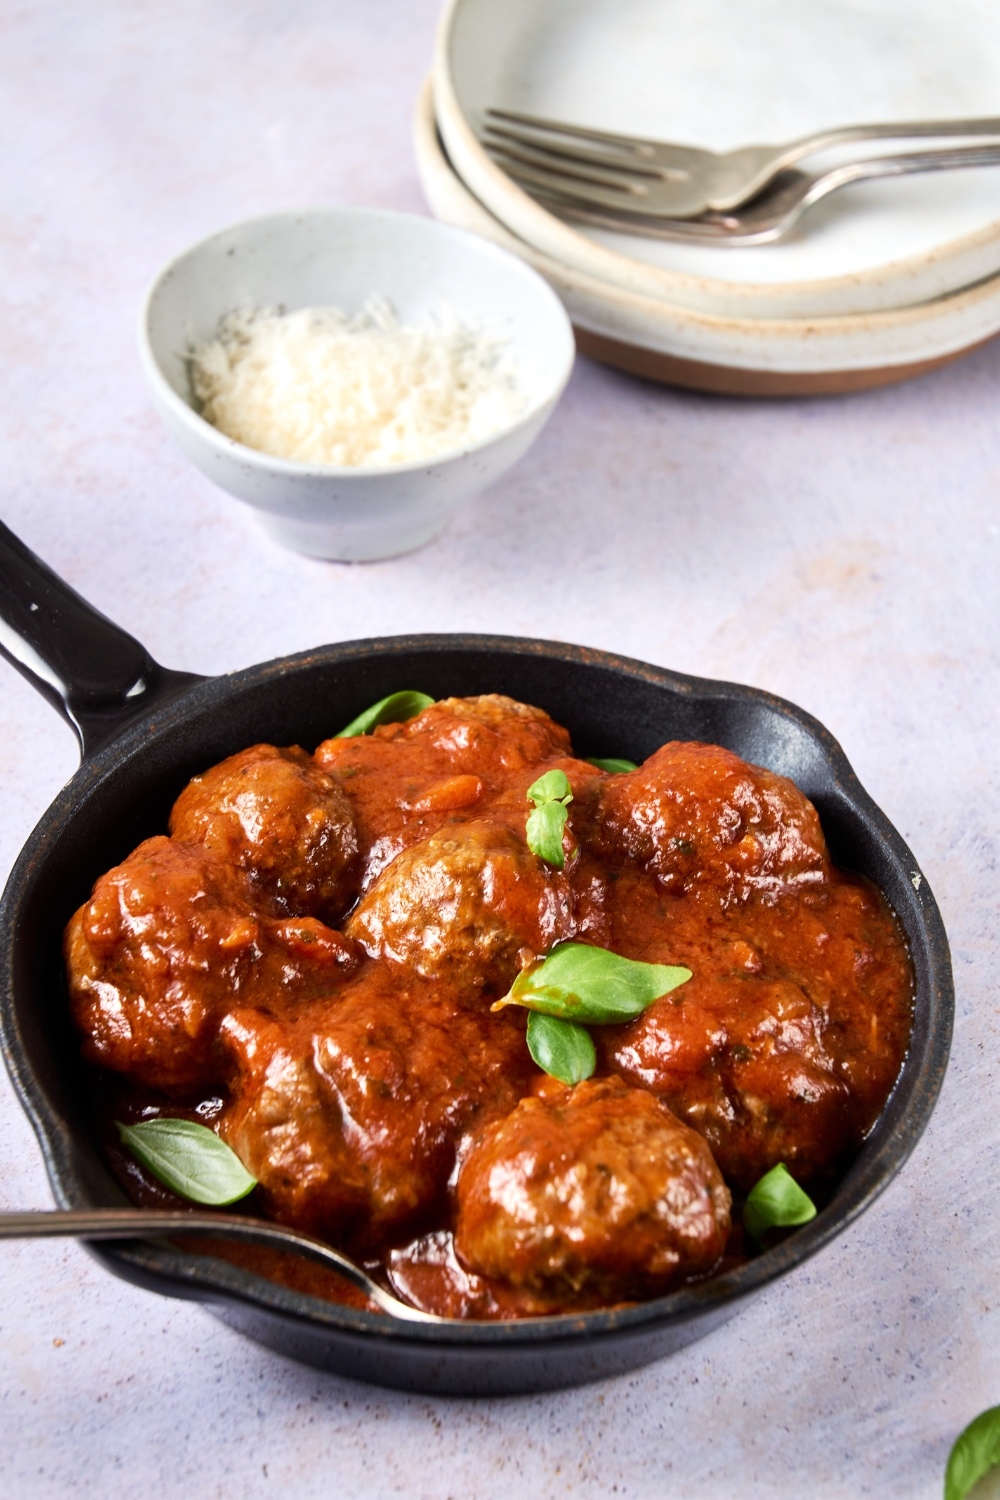 A small black pan holds cooked meatballs and sauce. A spoon rests in the pan.